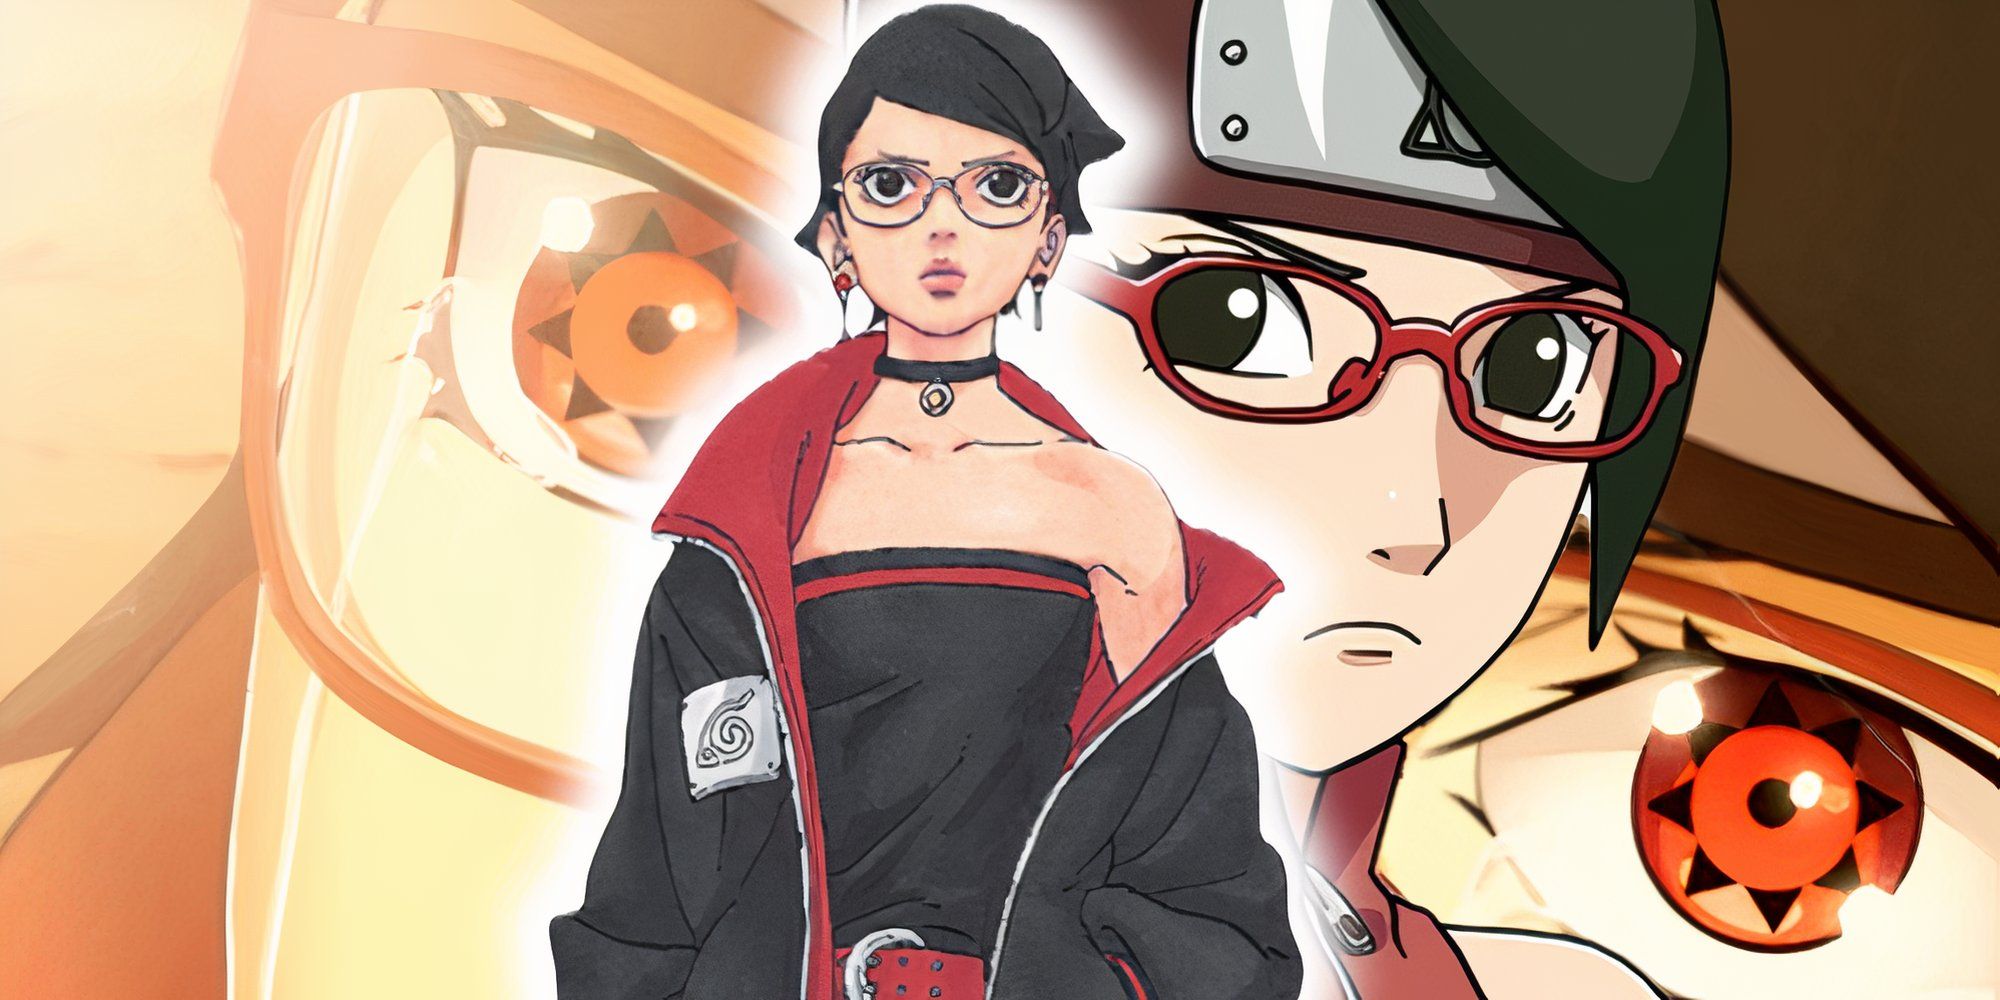 Image of Sarada grown up in Two Blue Vortex with an image of her younger in the background